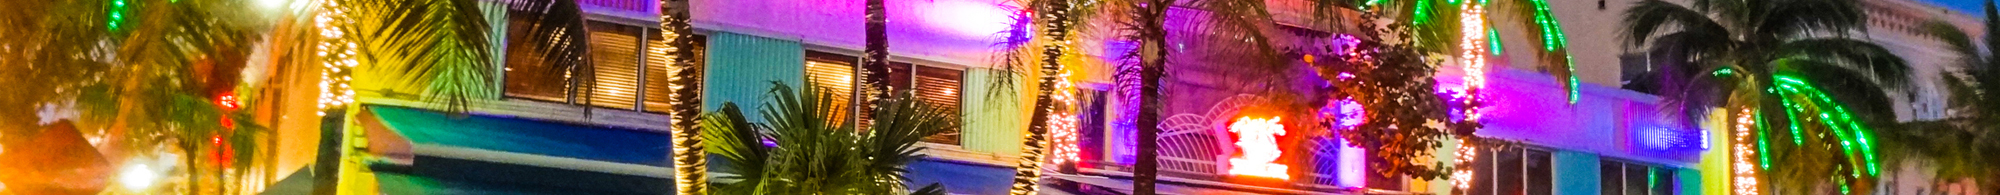 shot of a Miami street with neon lighting up the night